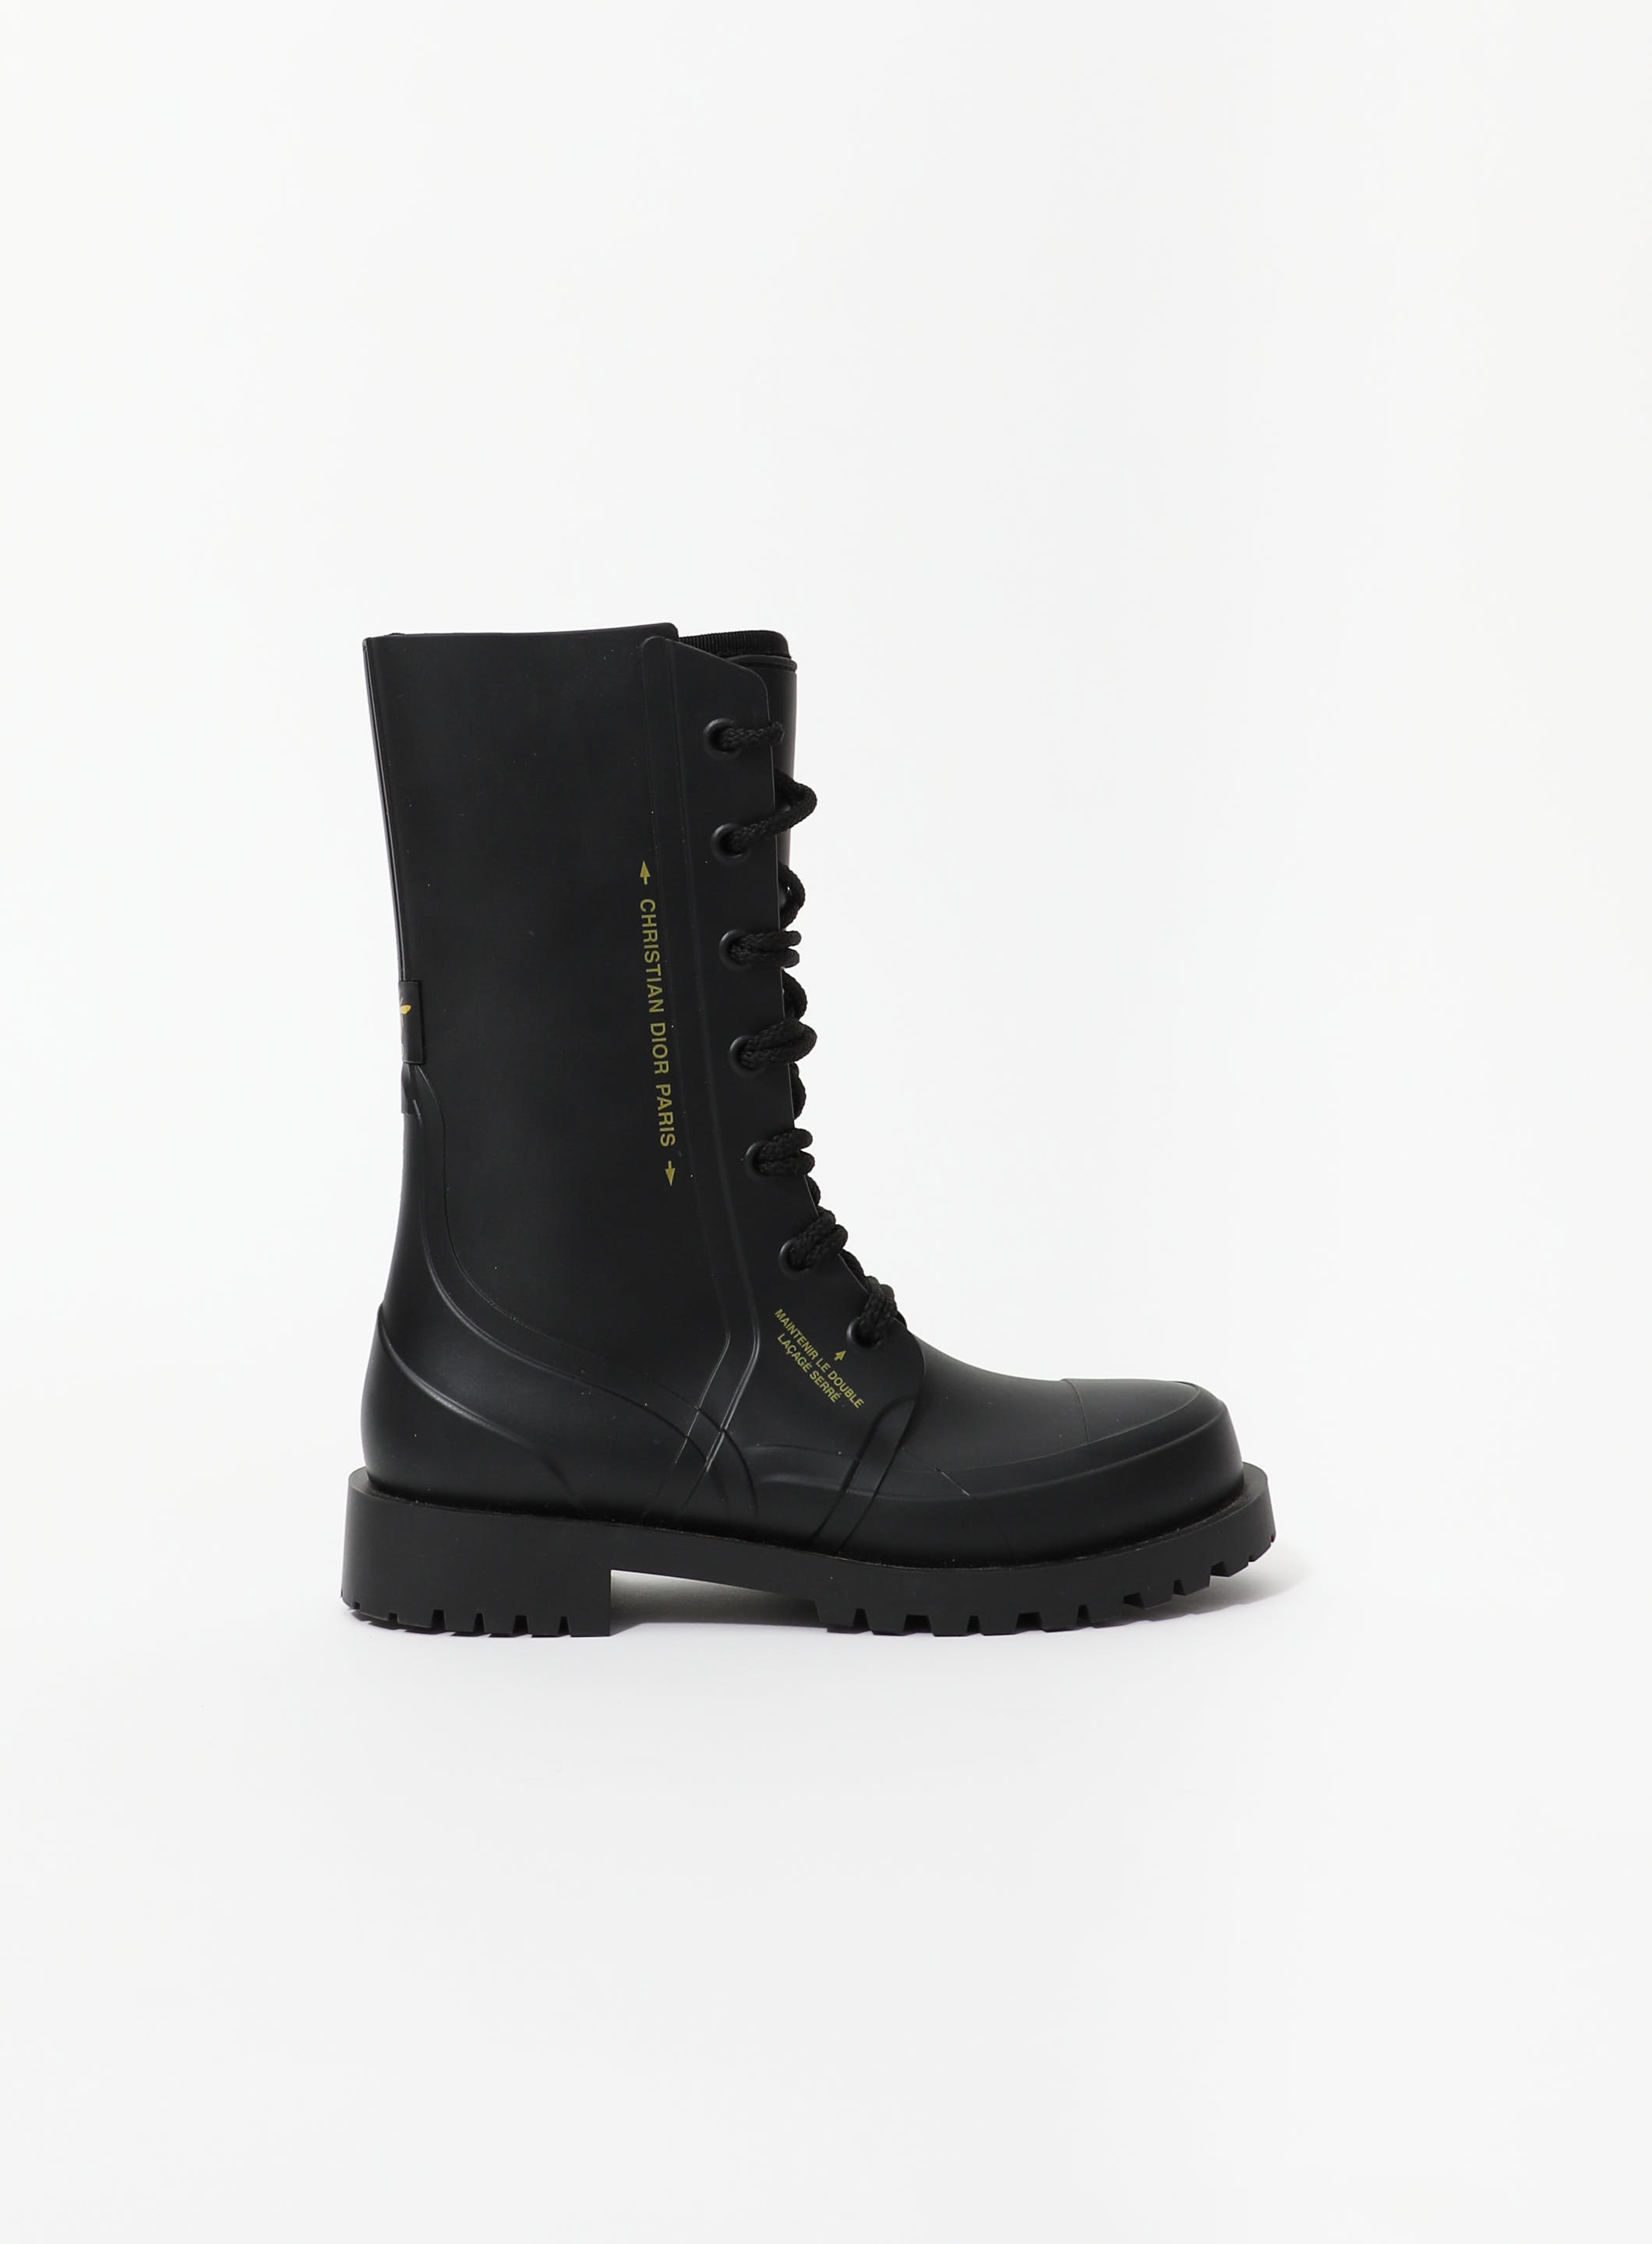 Christian Dior White Leather Combat Boots